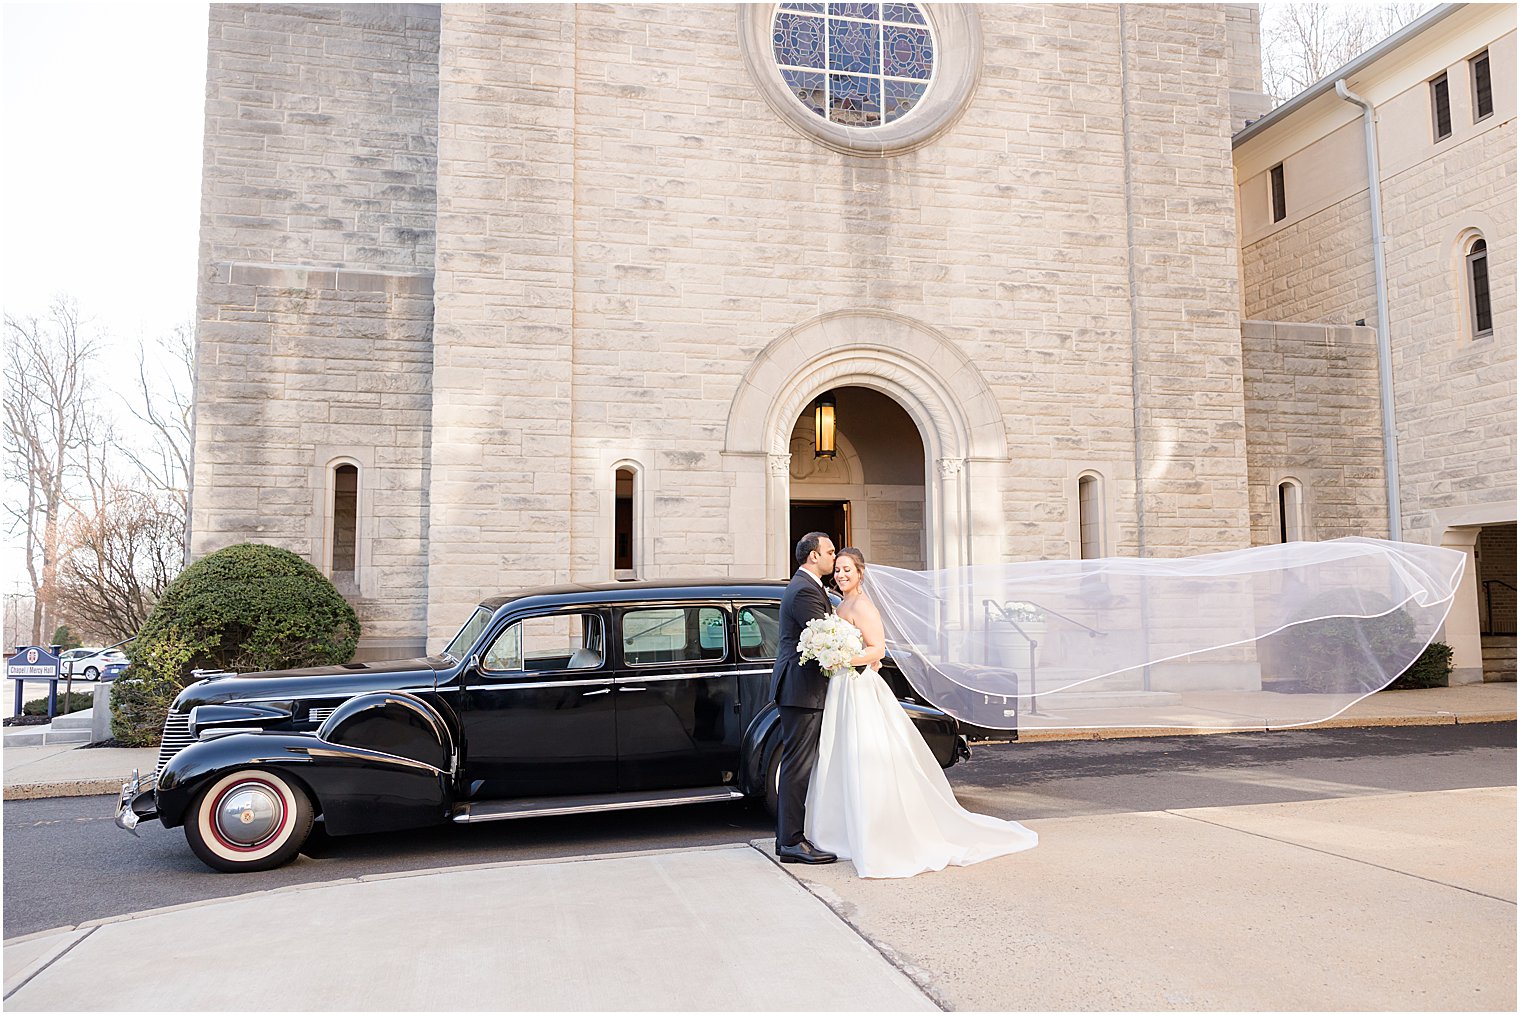 newlyweds kiss by classic black car outside the Immaculate Conception Chapel at Mount Saint Mary Academy